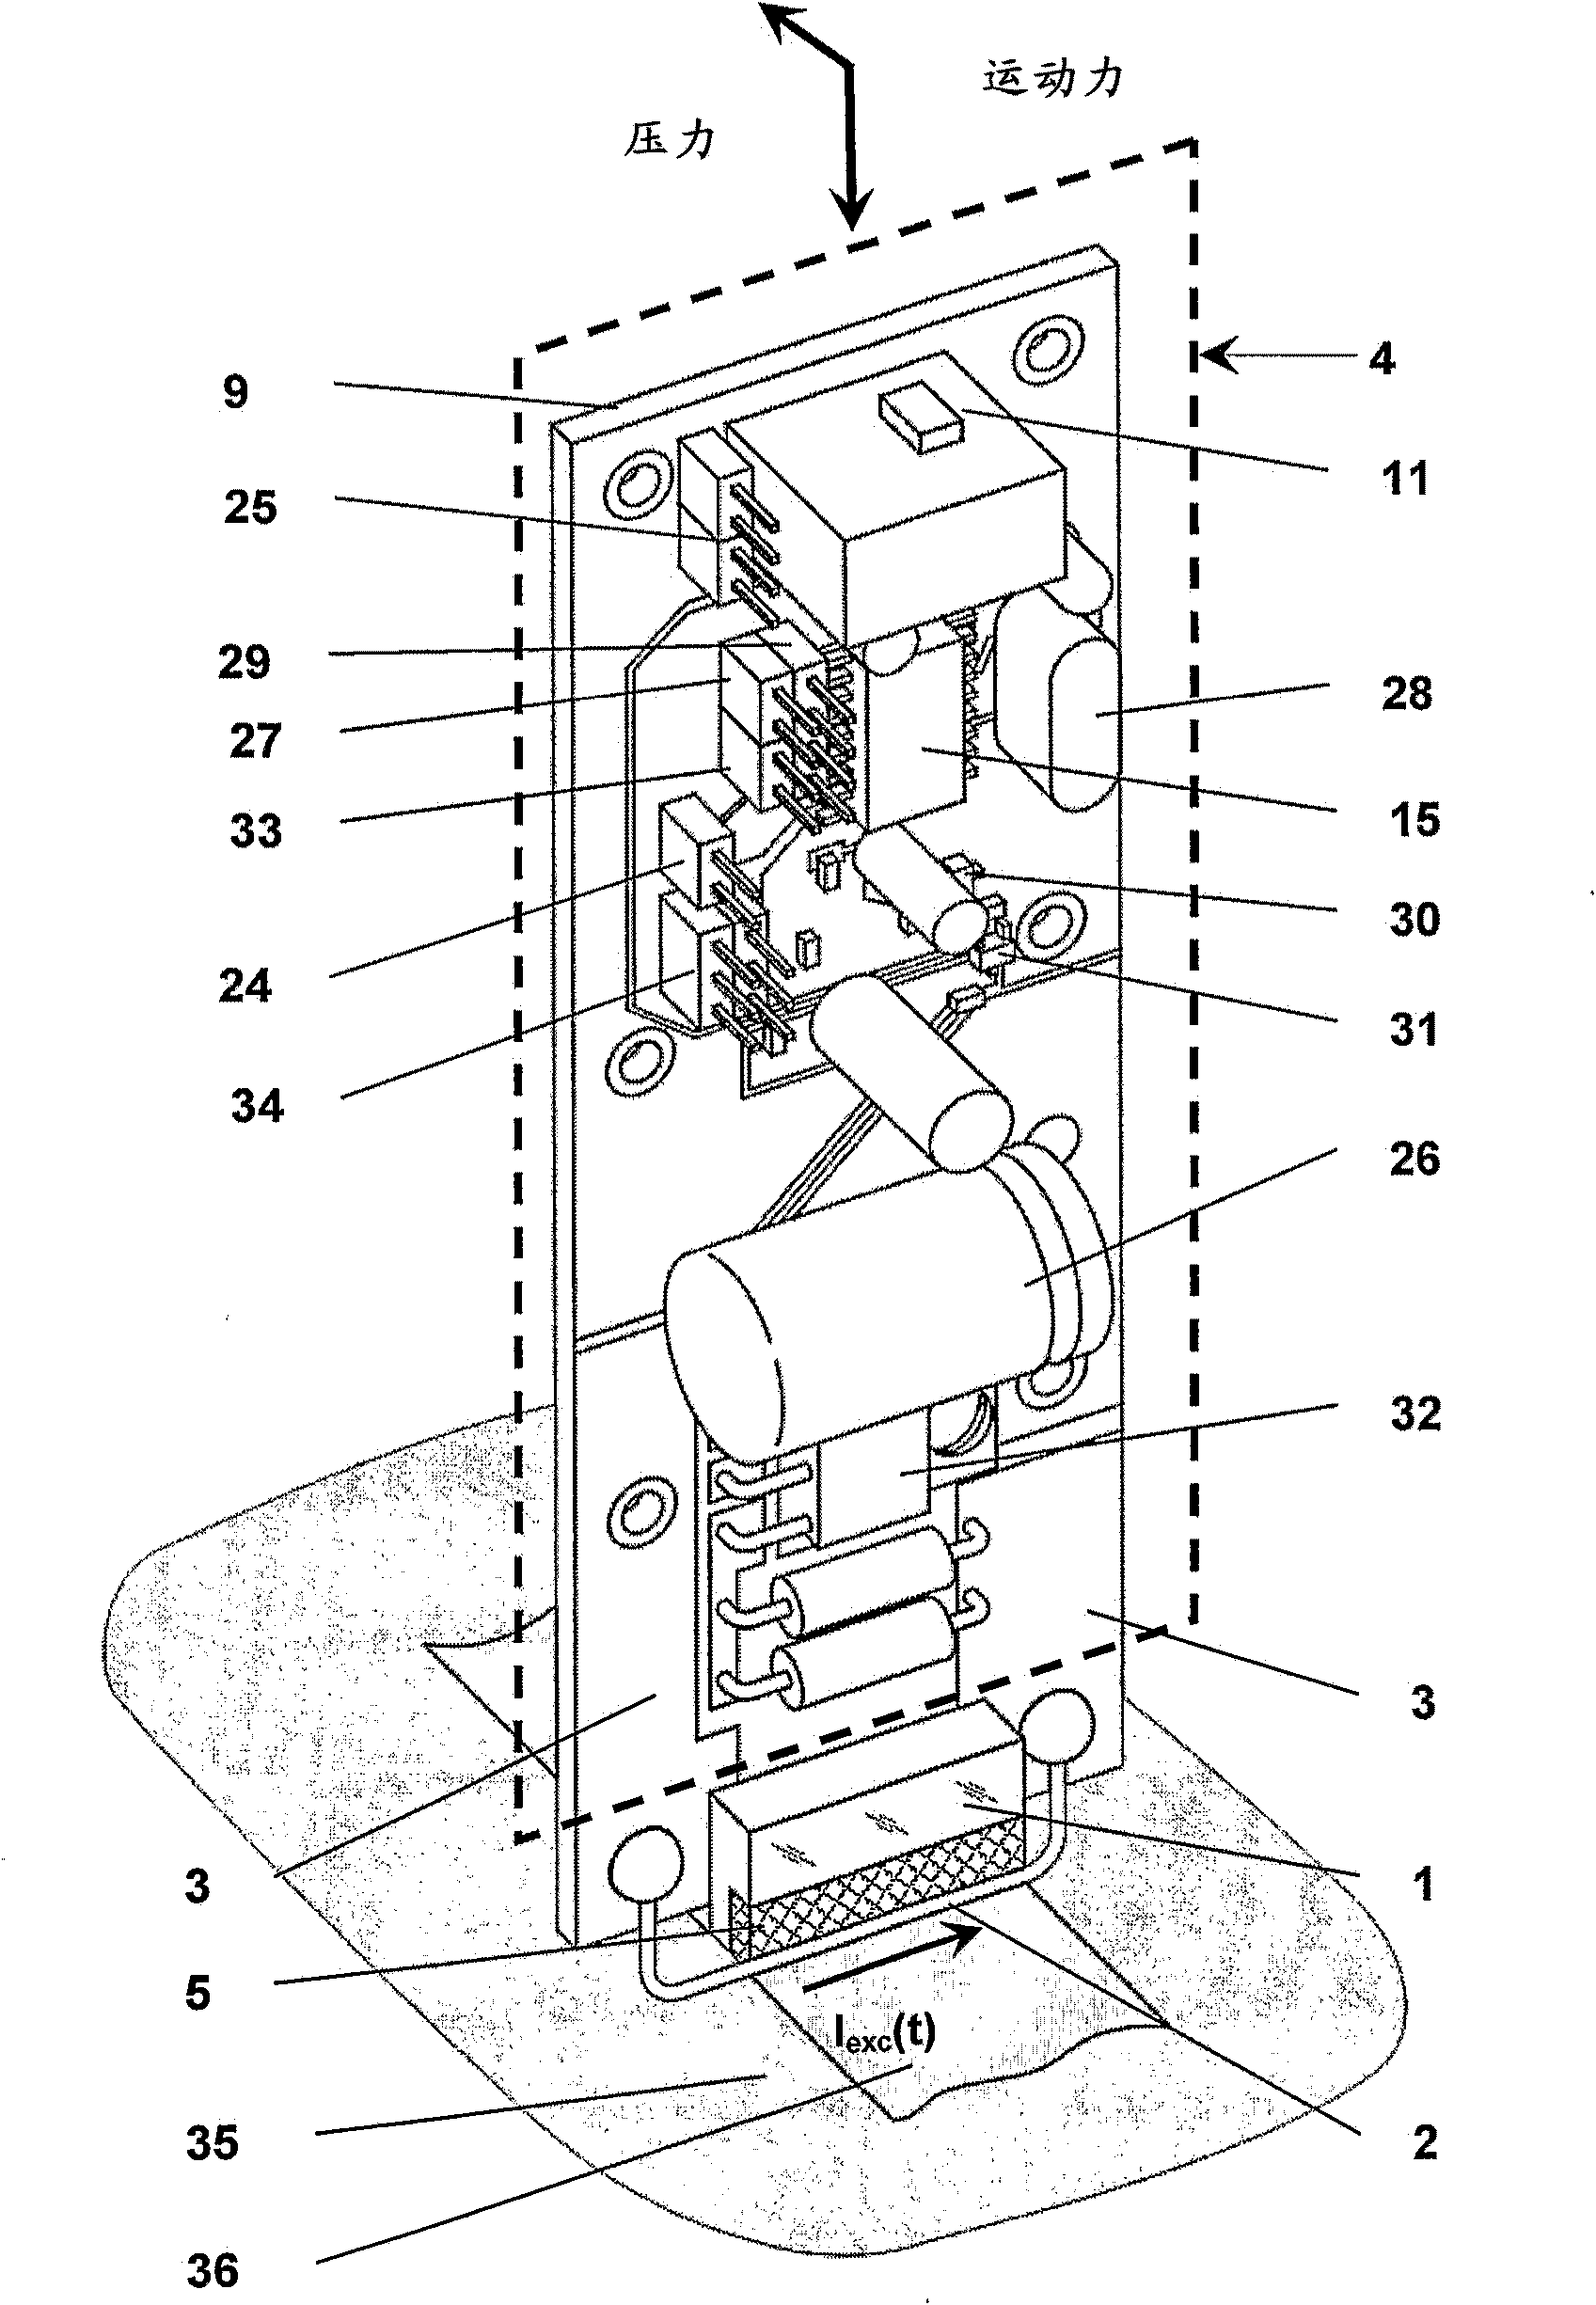 Inductor of eddy currents for magnetic tape testing and scanner based thereon